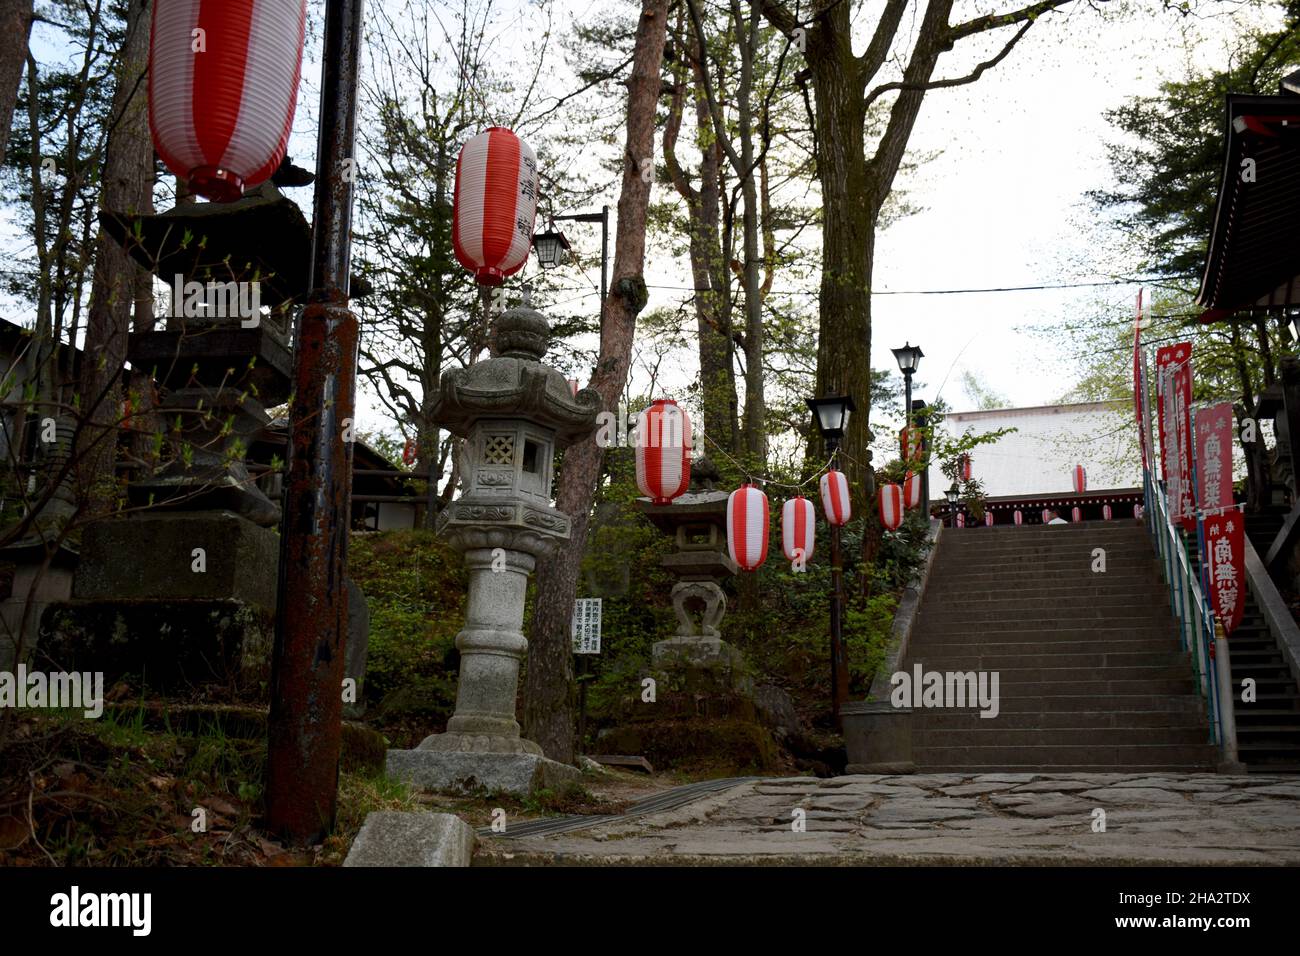 Hanging paper lanterns over stairs at a shrine in Japan Stock Photo